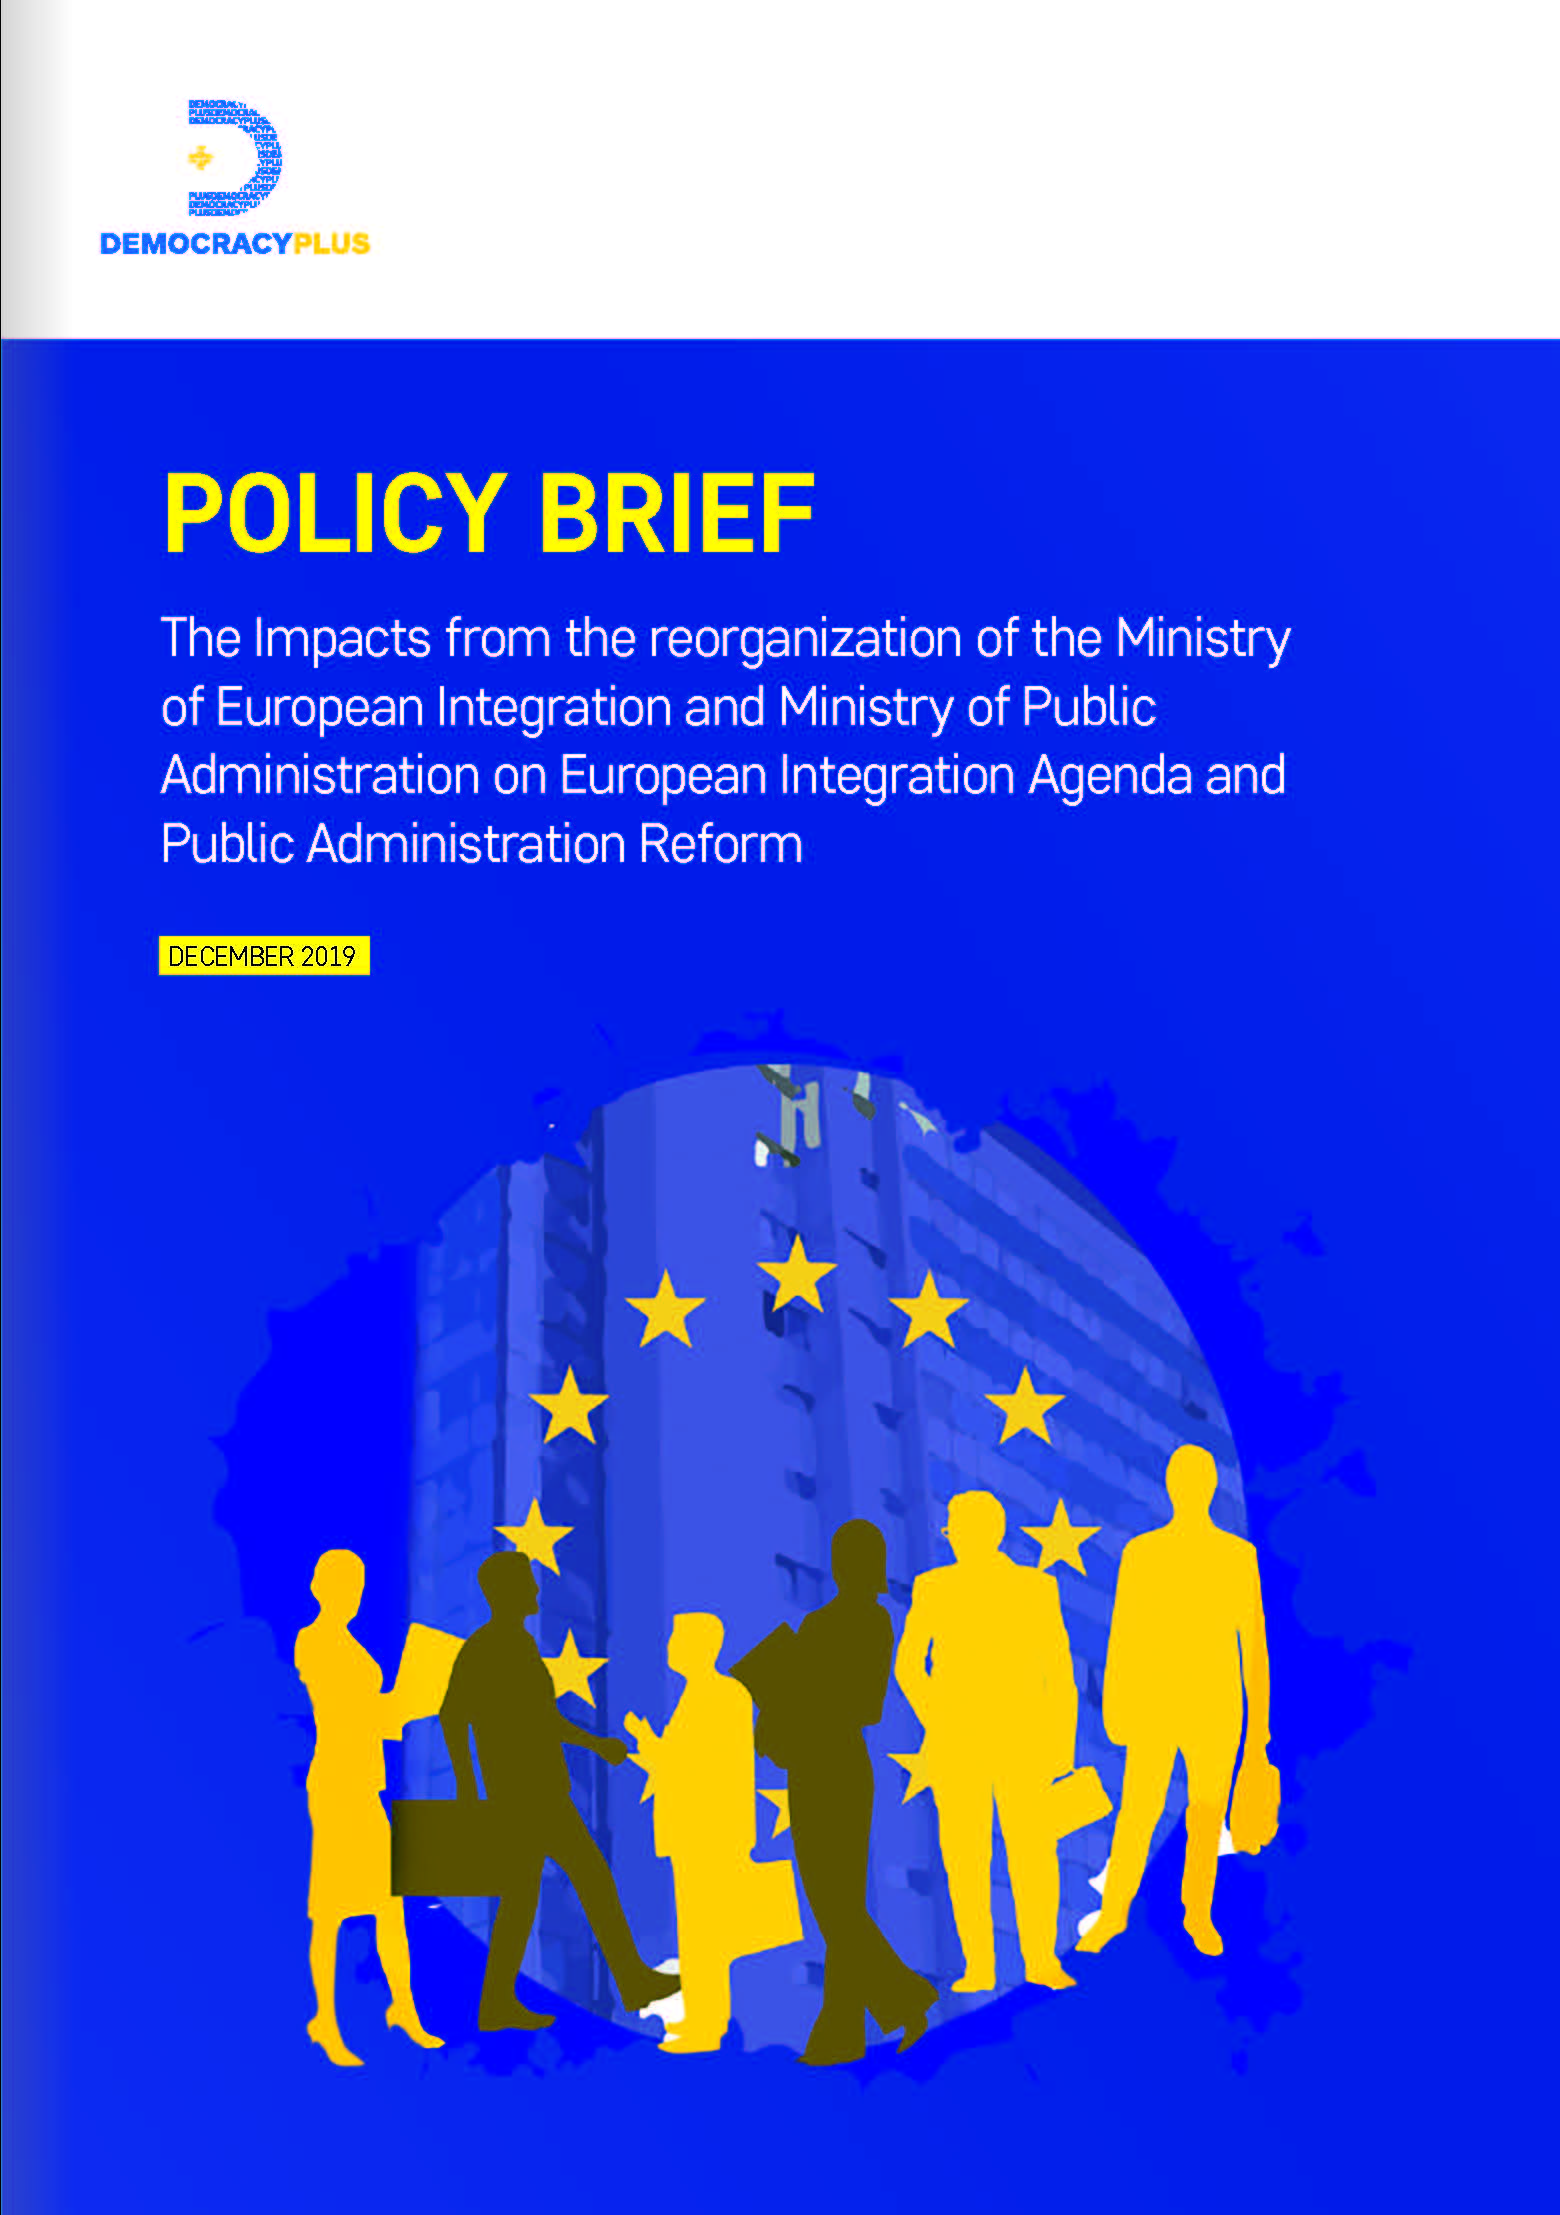 Policy Brief, The Impacts from the reorganization of the Ministry of European Integration and Ministry of Public Administration on European Integration Agenda and Public Administration Reform